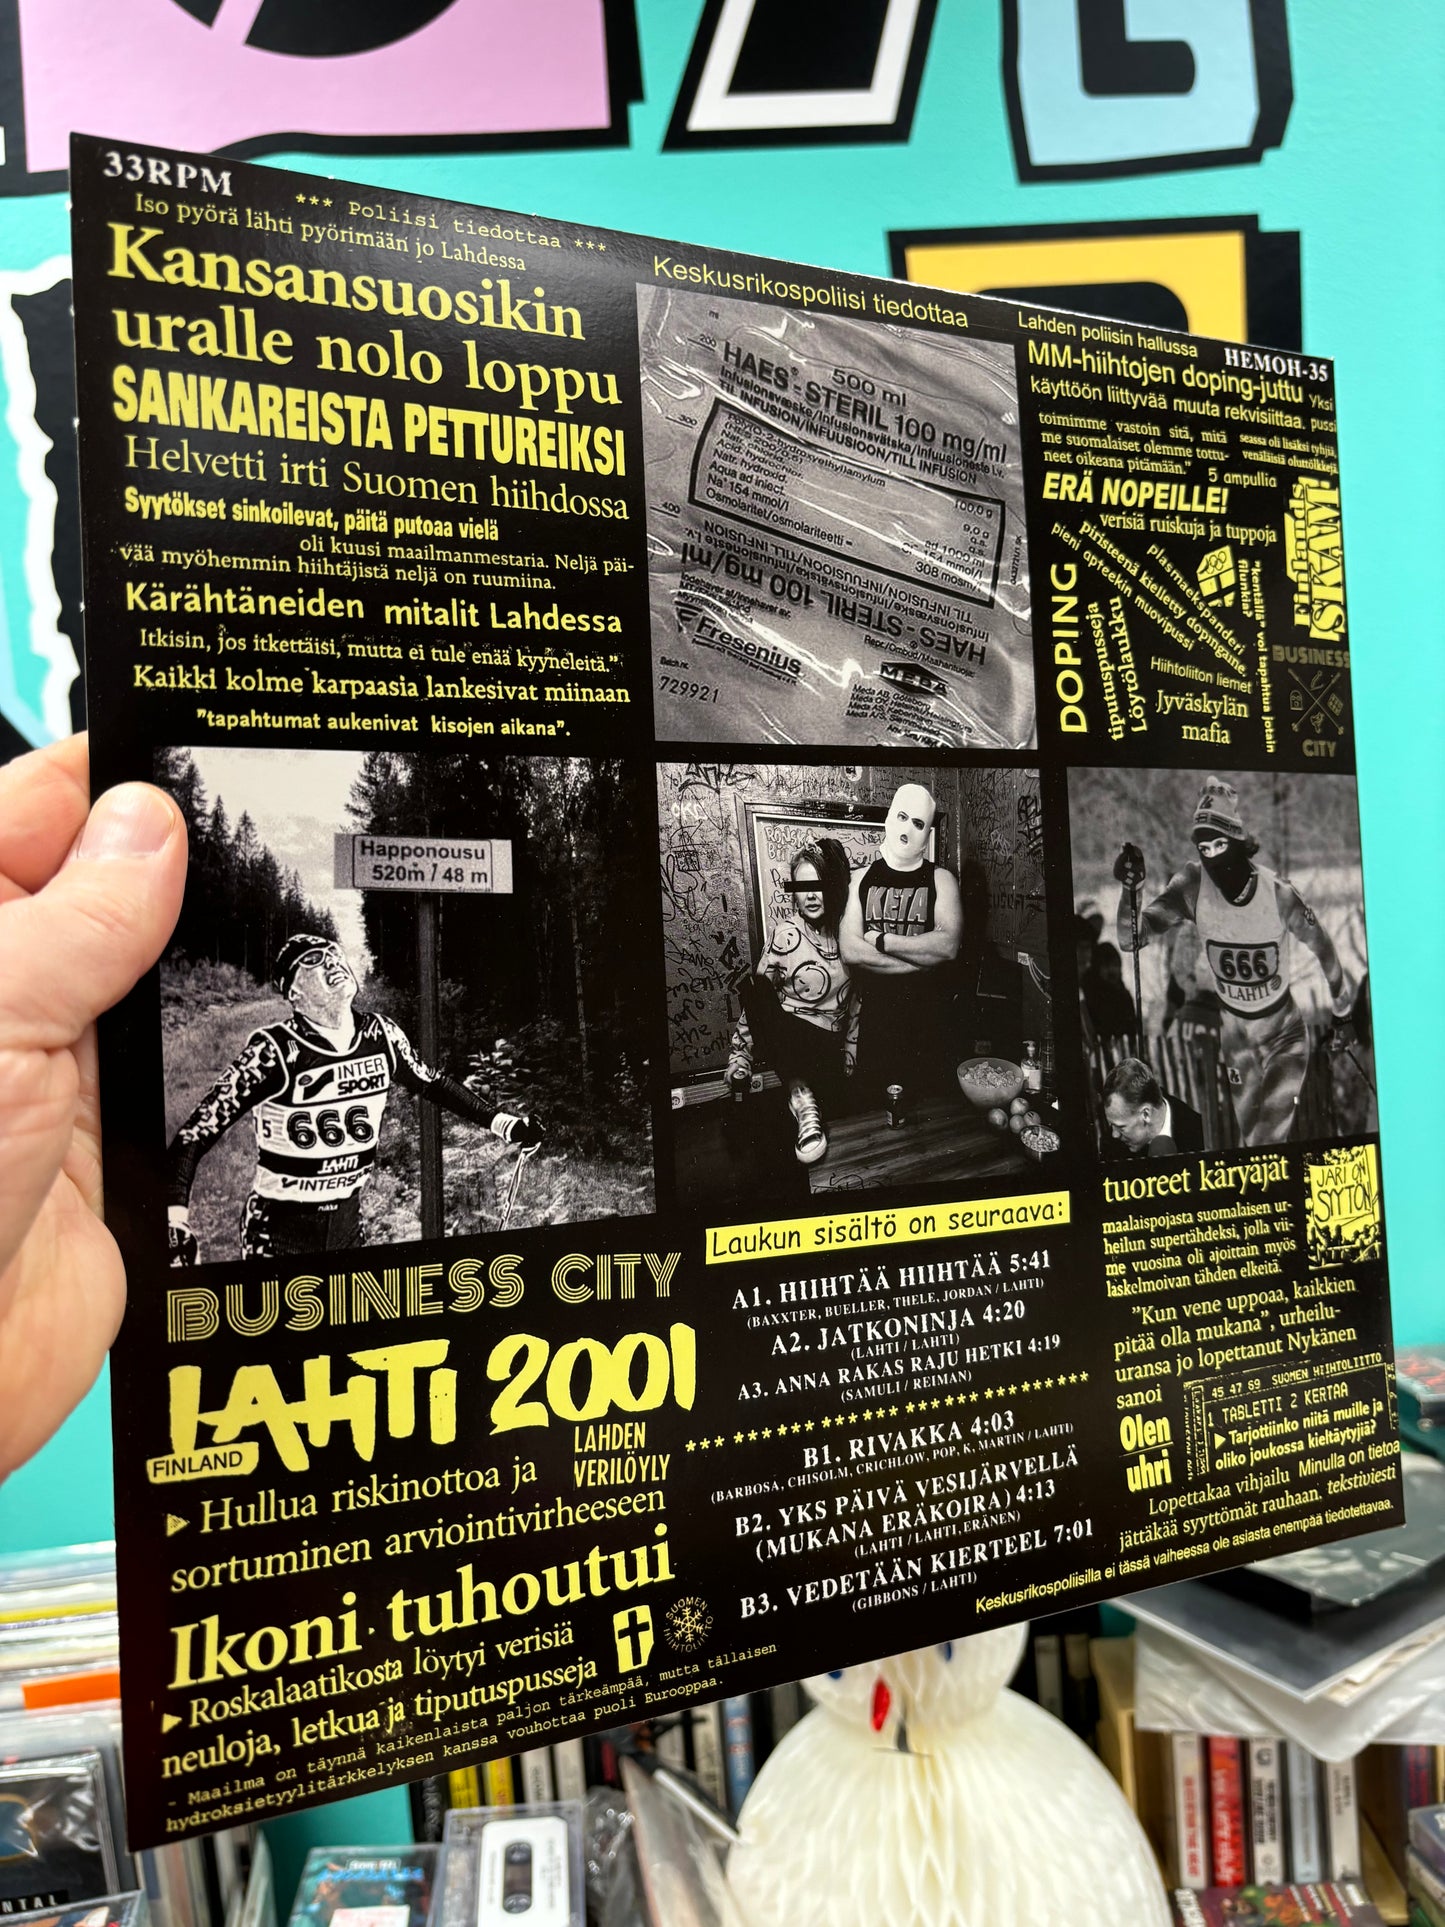 Business City: Lahti 2001, 12inch album, Limited Edition, Finland 2023